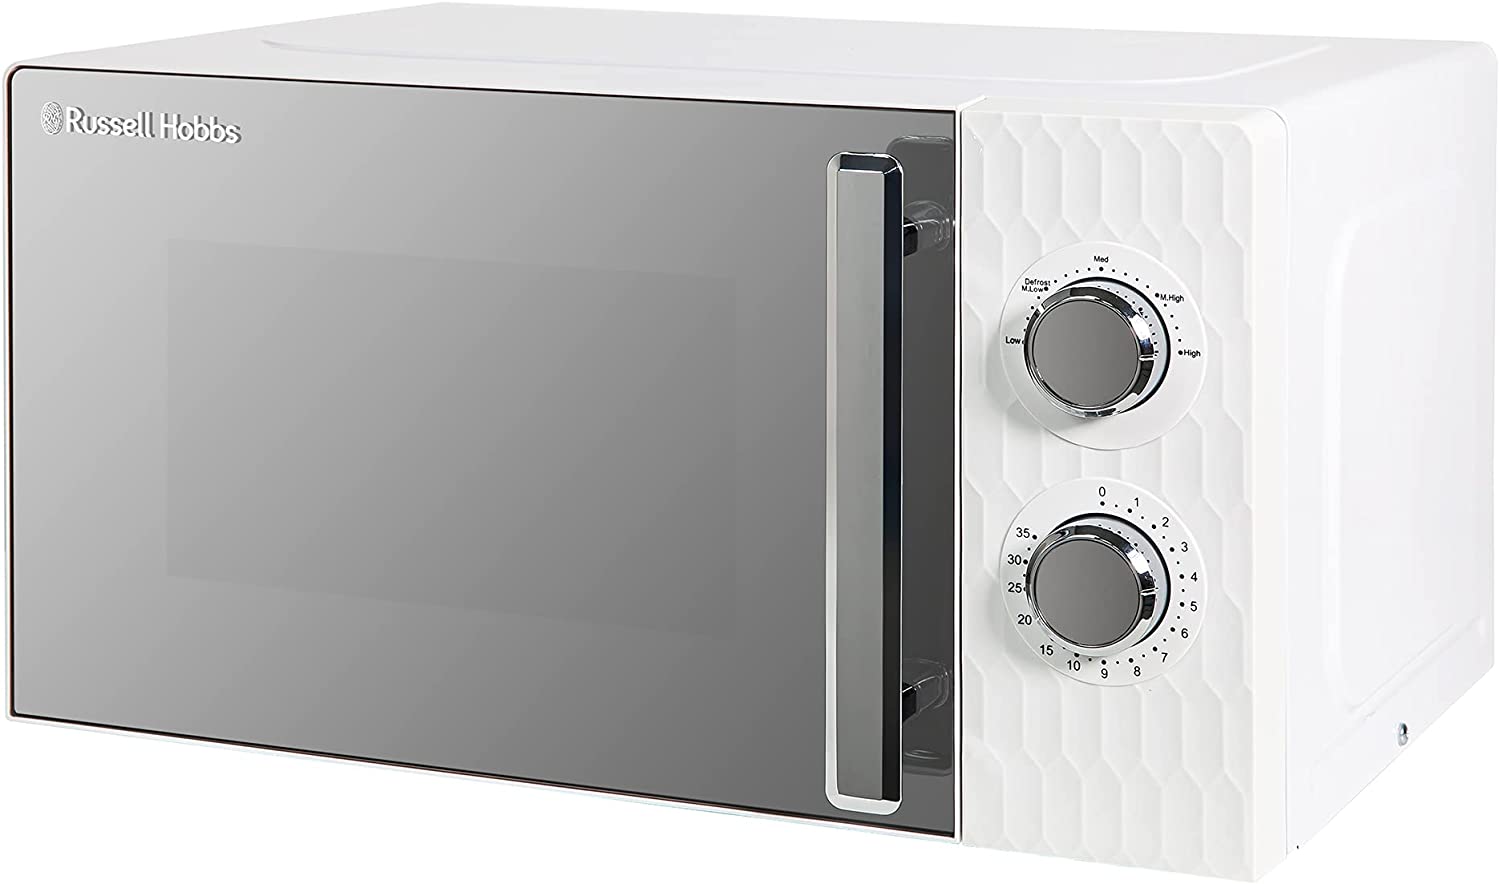 Russell Hobbs Honeycomb RHMM715 17L 700W Manual Microwave Oven White with 5 Power Levels, Integrated Timer and Defrost Function (White)